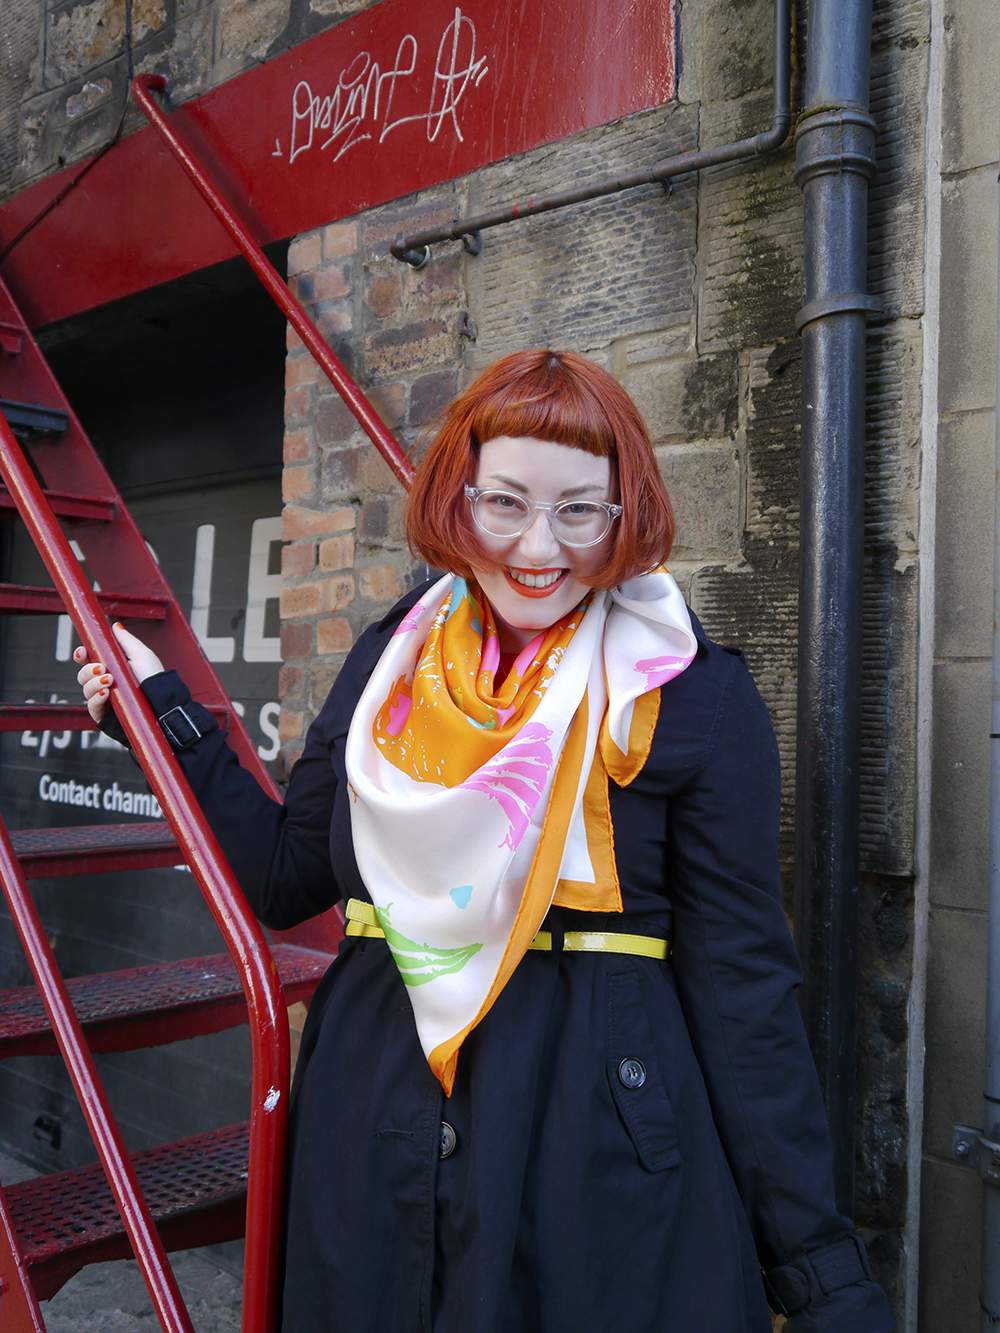 Charcot, MS Awareness Week, MS inspired jewellery, Scottish Blogger, red head, red bob, micro frine, ginger hair, Scottish Street Style, Scottish designer, skull necklace, neon necklaces, neon jewellery, colourful scarf, silk scarf, Sun Jellies, Taisir Gibreel, Iolla, seewithiolla, charity shop, Edinburgh street style, colourful outfit, summer style, bright outfit